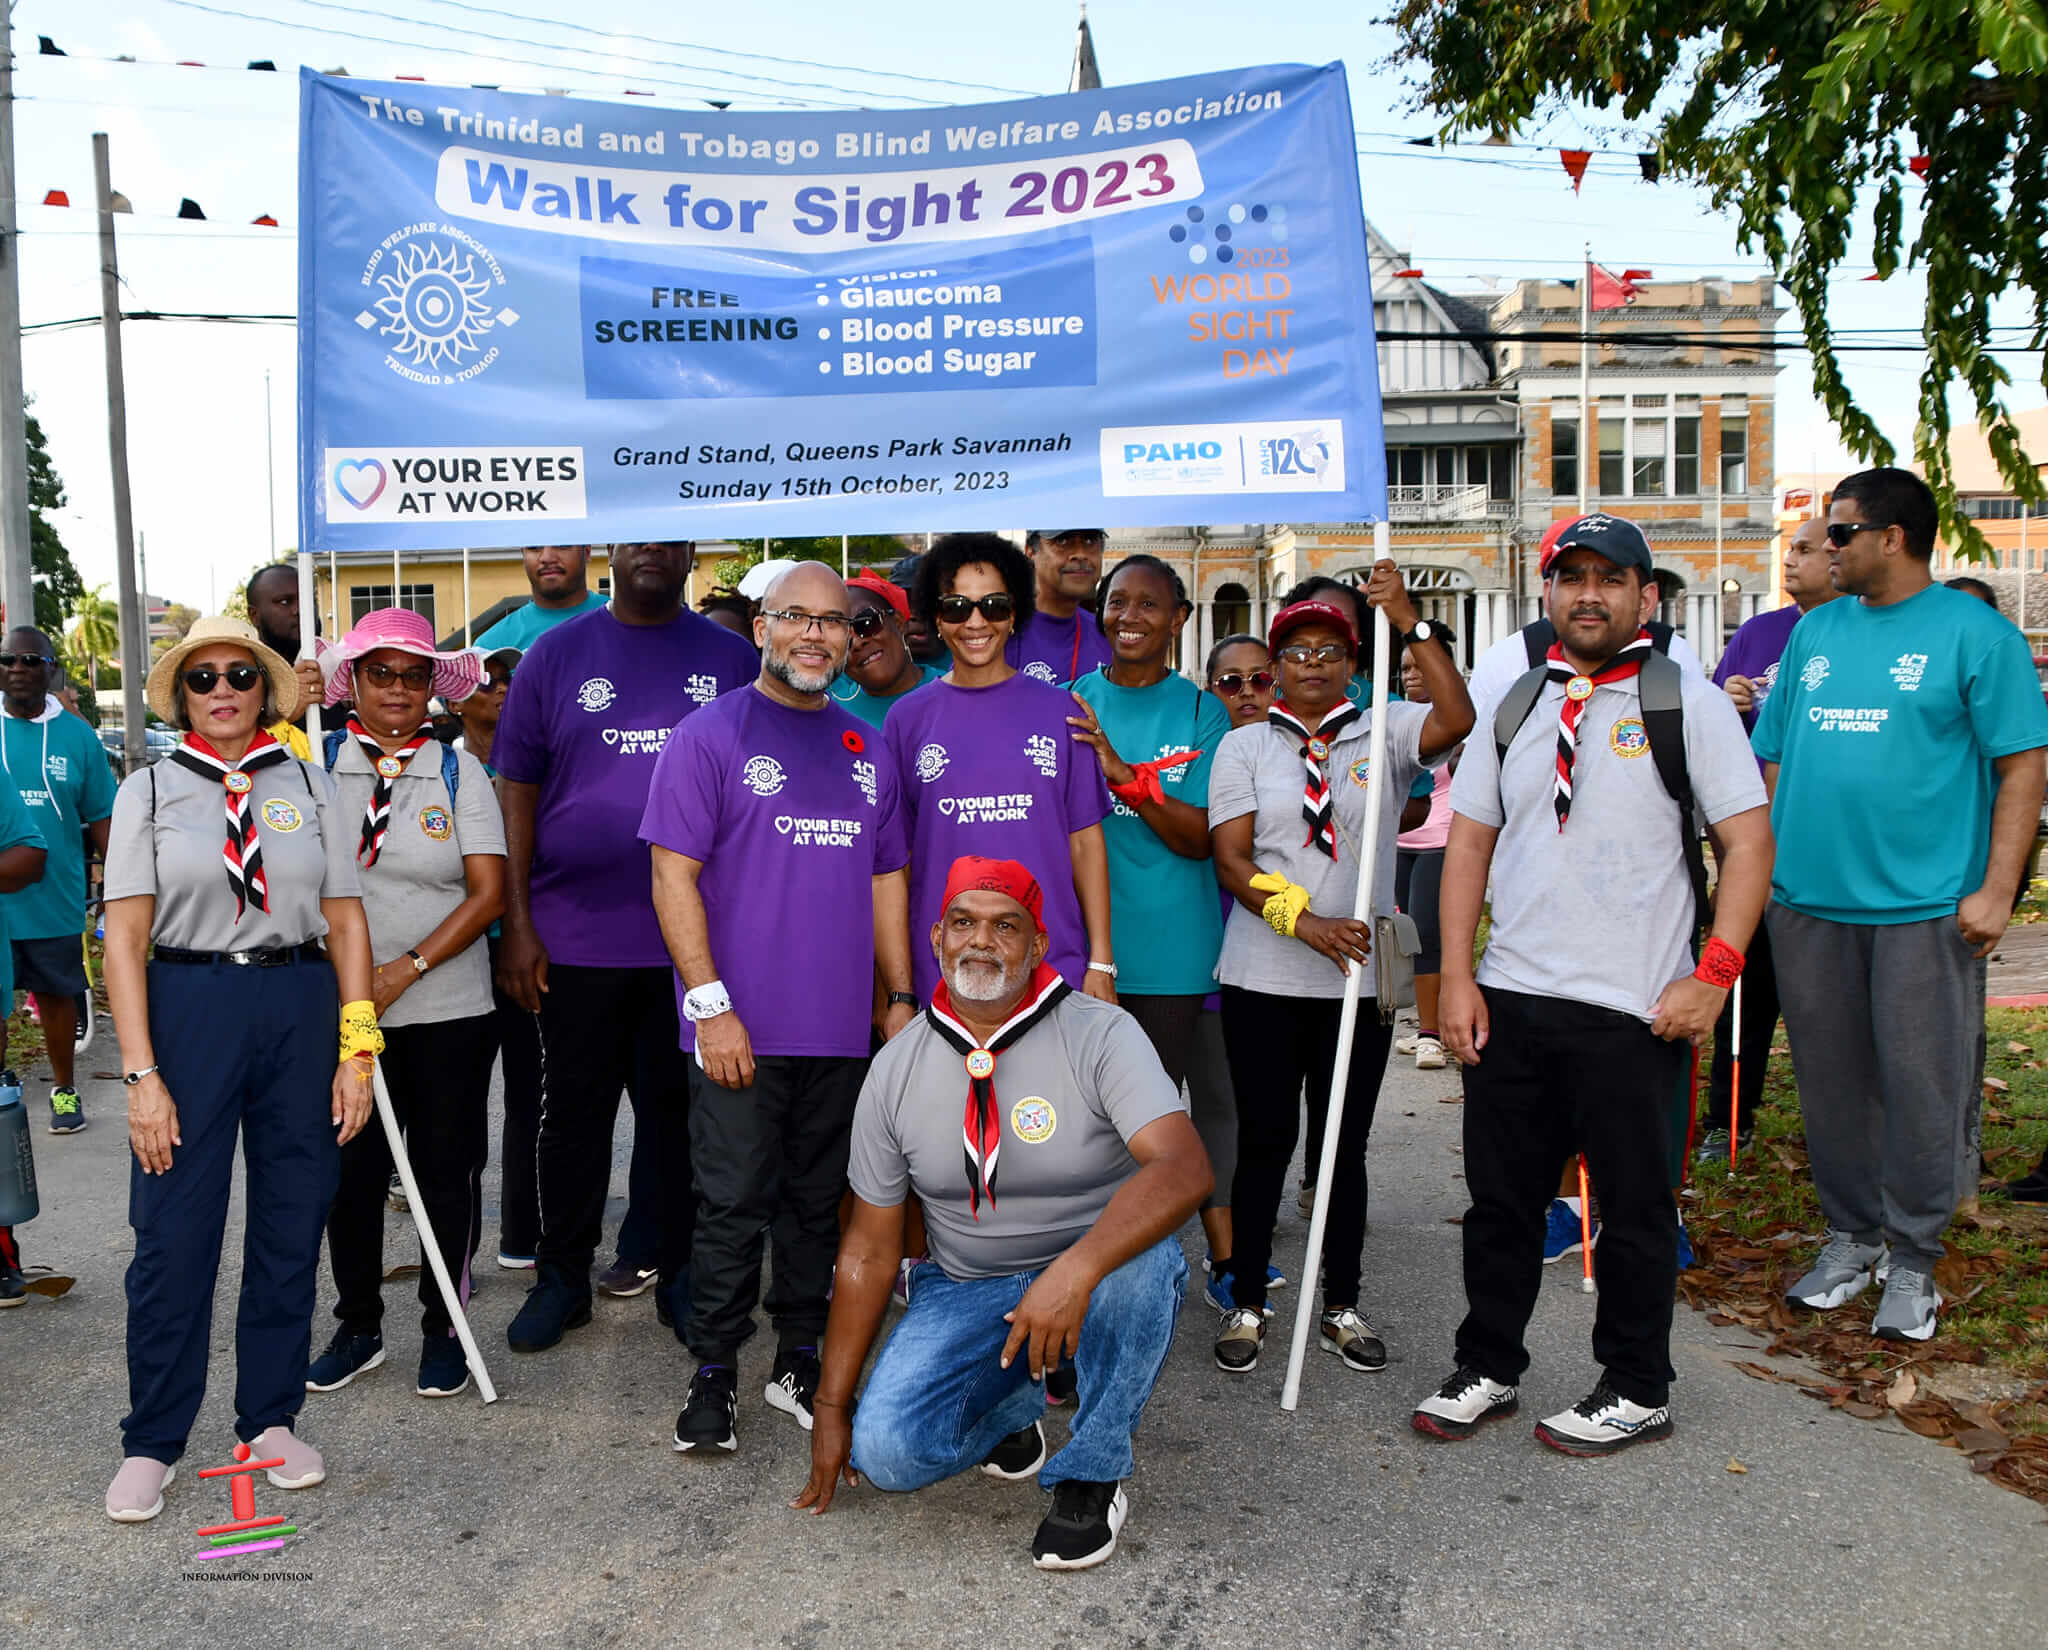 His Excellency Participates in the Walk for Sight 2023